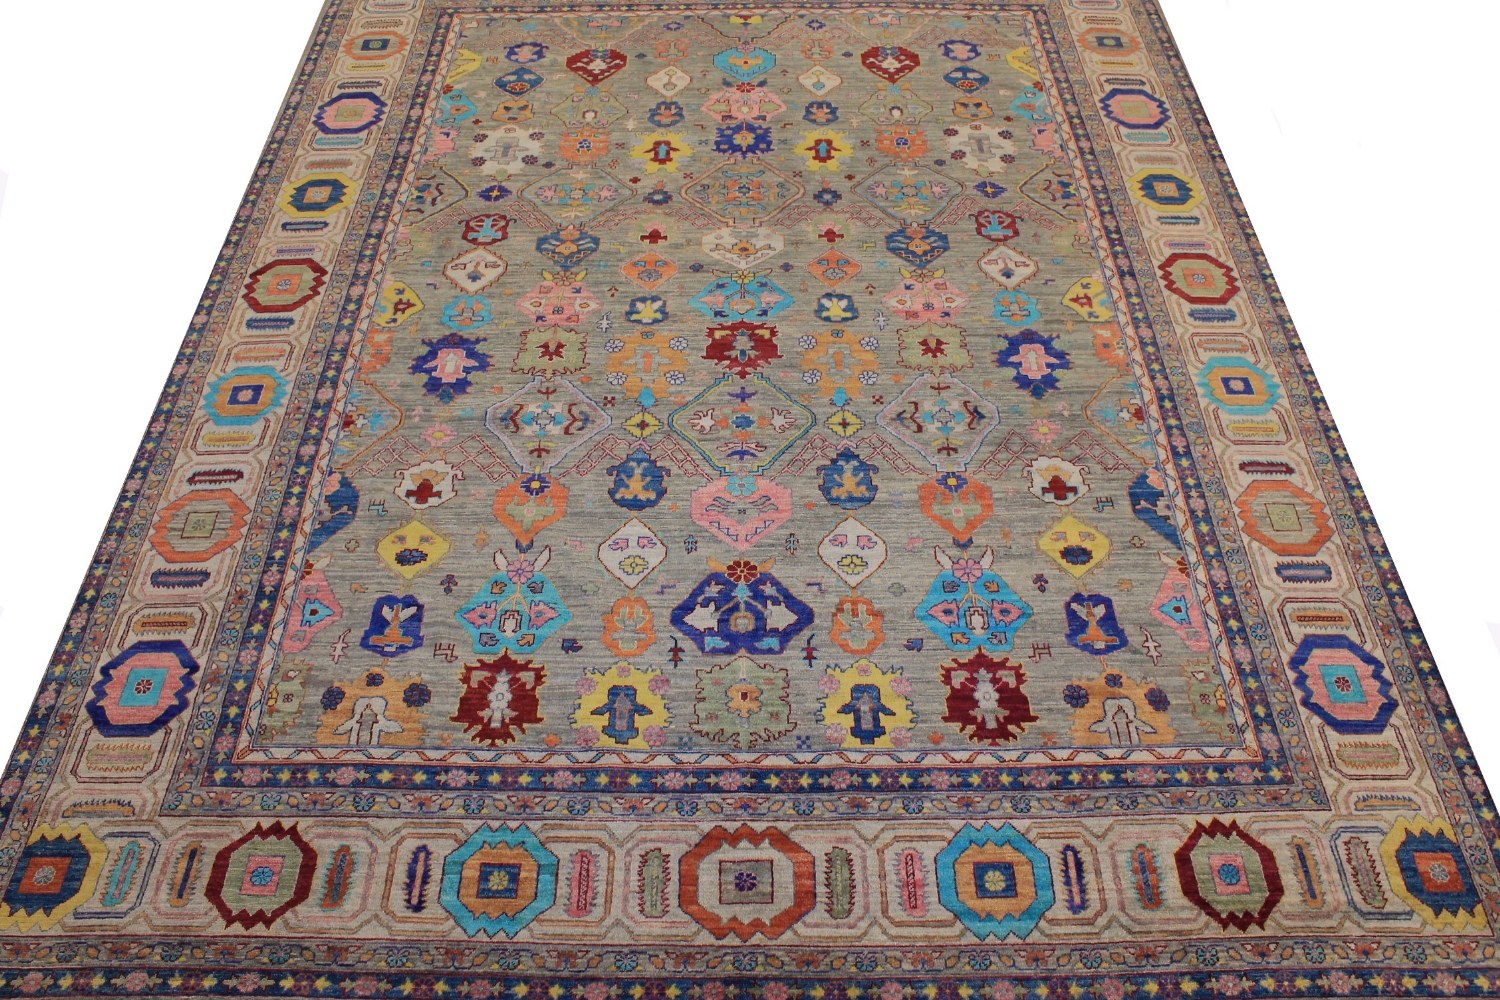 9x12 Aryana & Antique Revivals Hand Knotted Wool Area Rug - MR025885